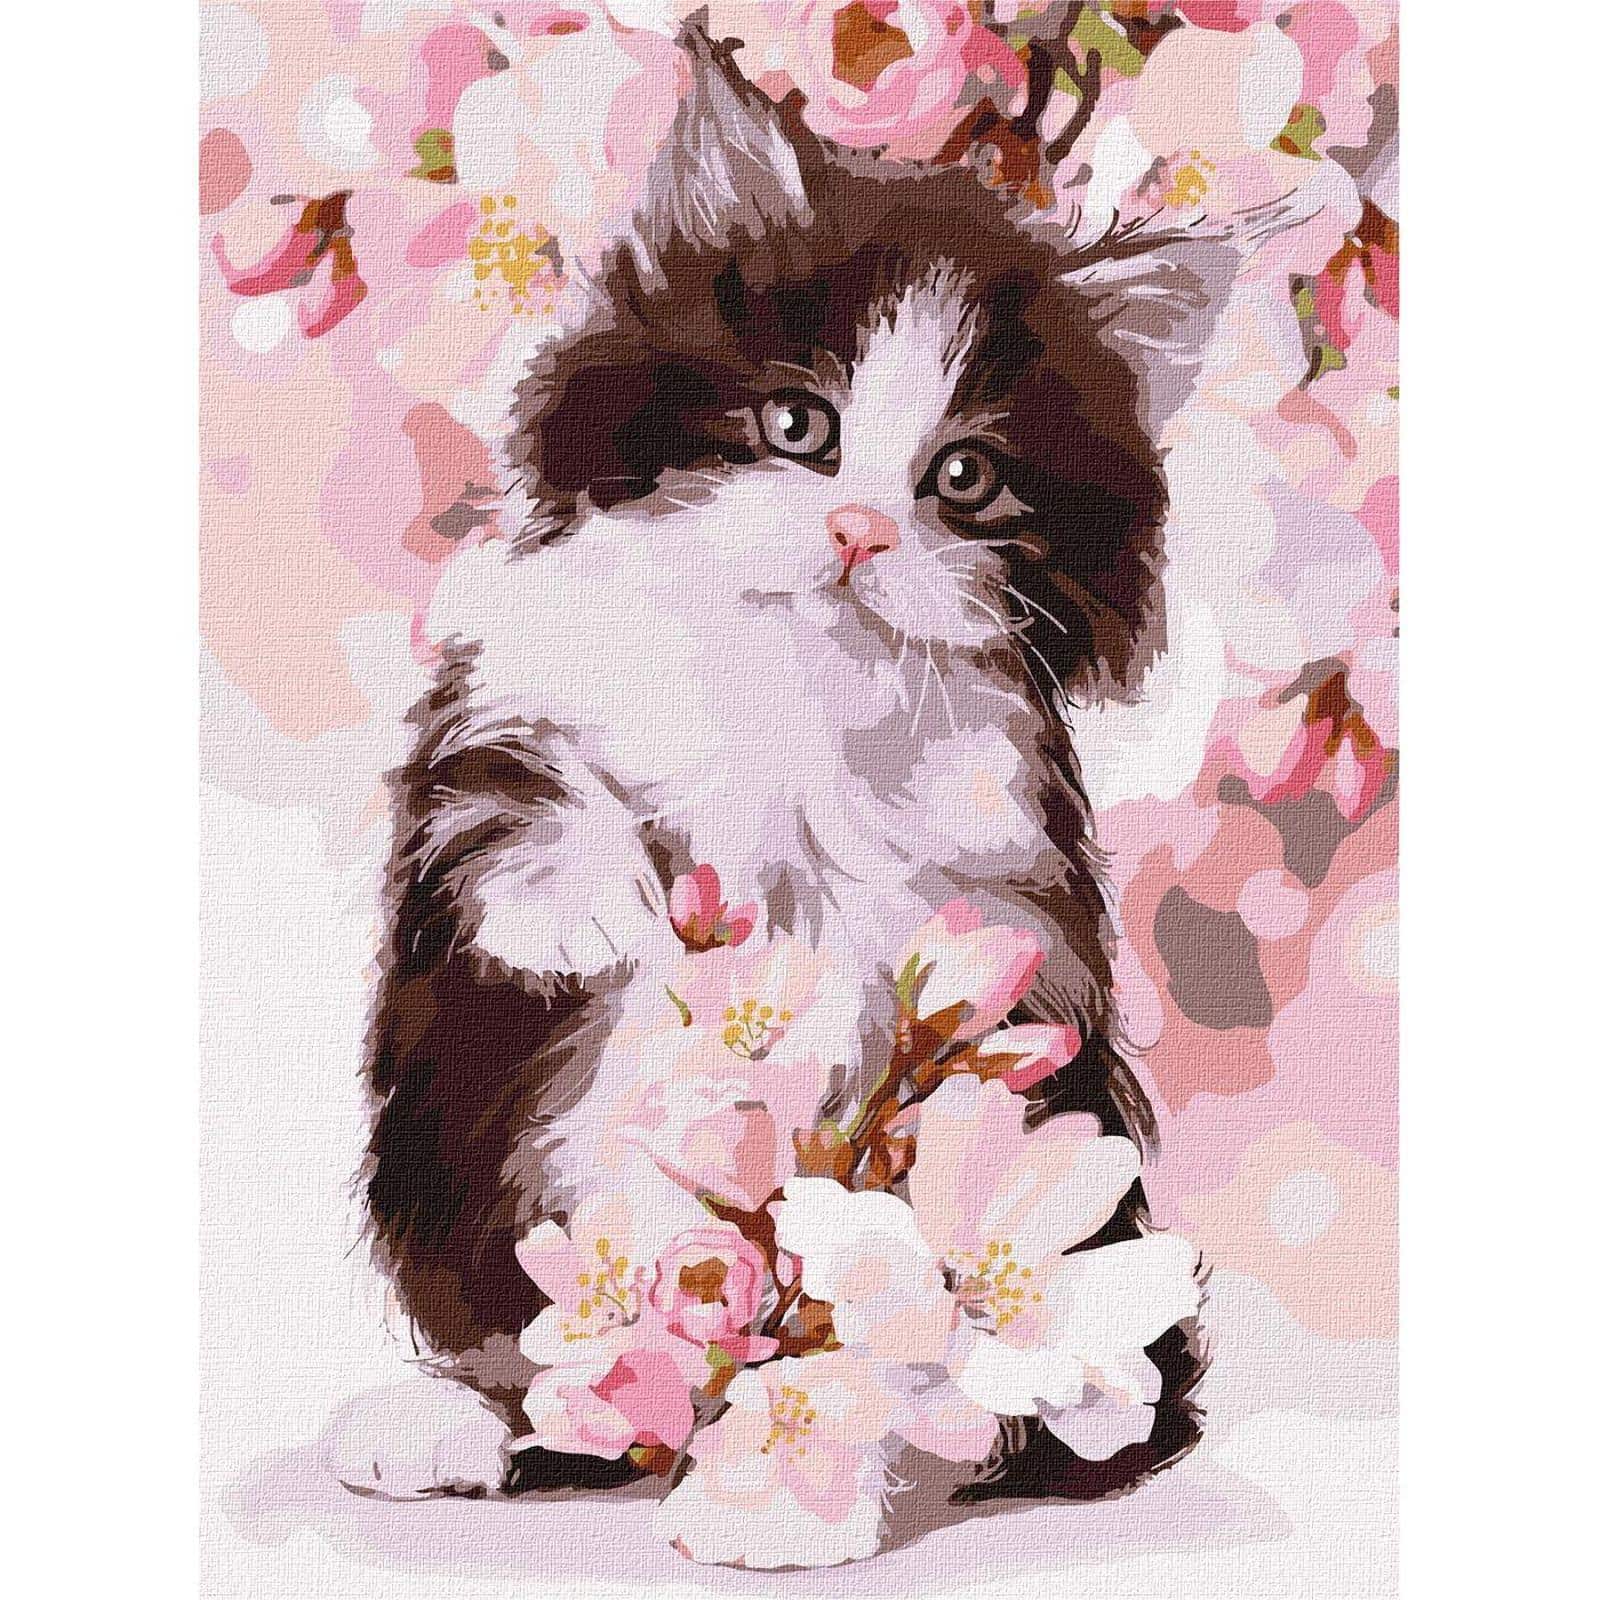 Ideyka Fluffy Kitten Painting by Numbers Kit